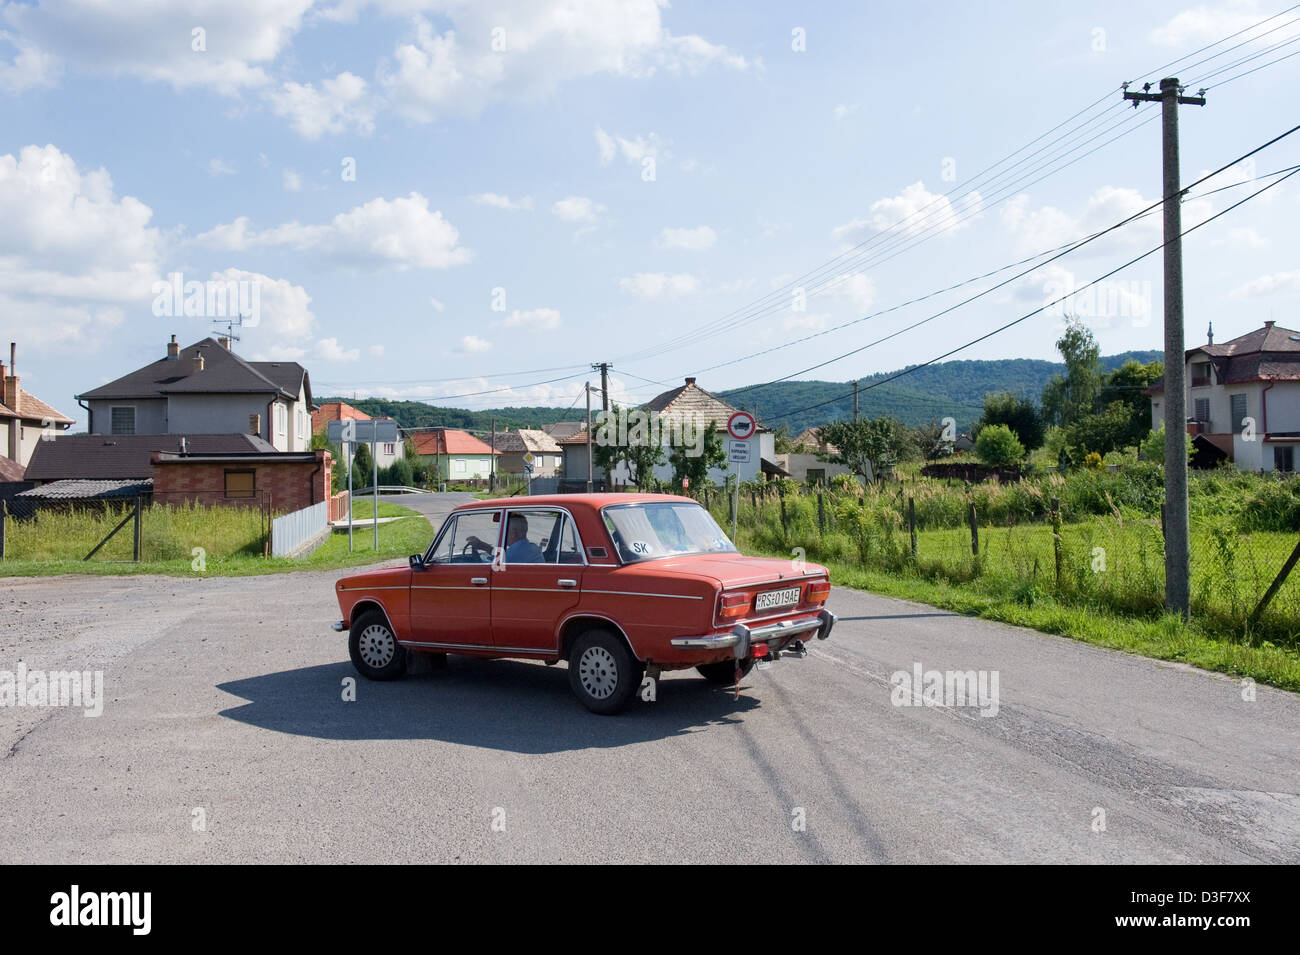 Tachty, Slovakia, a red Lada bends around a curve Stock Photo